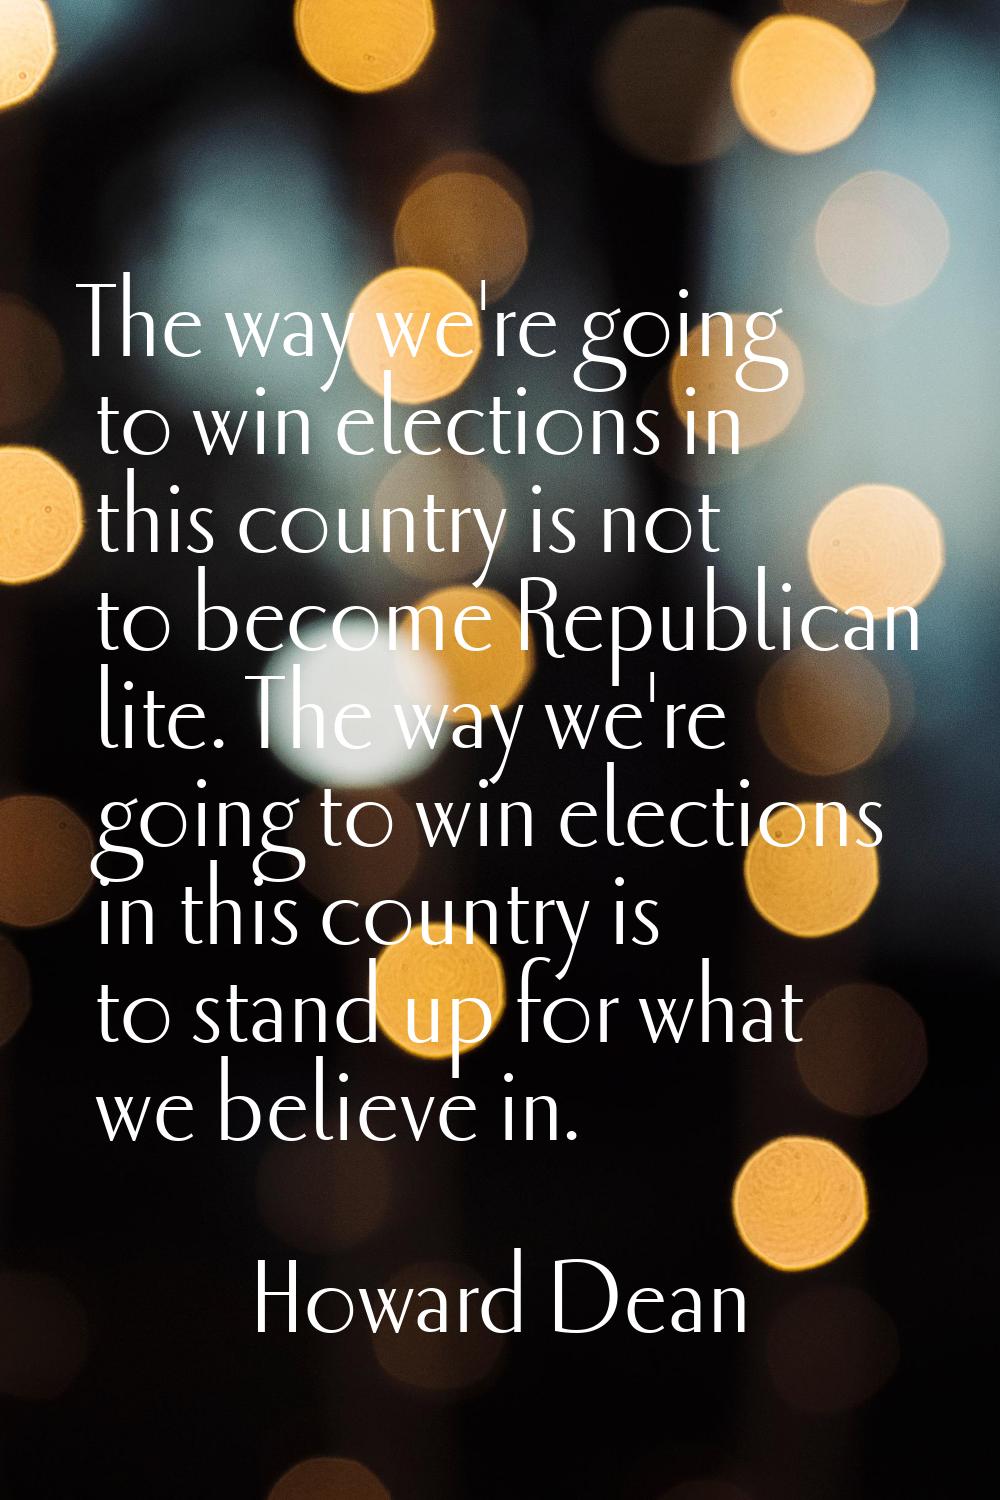 The way we're going to win elections in this country is not to become Republican lite. The way we'r